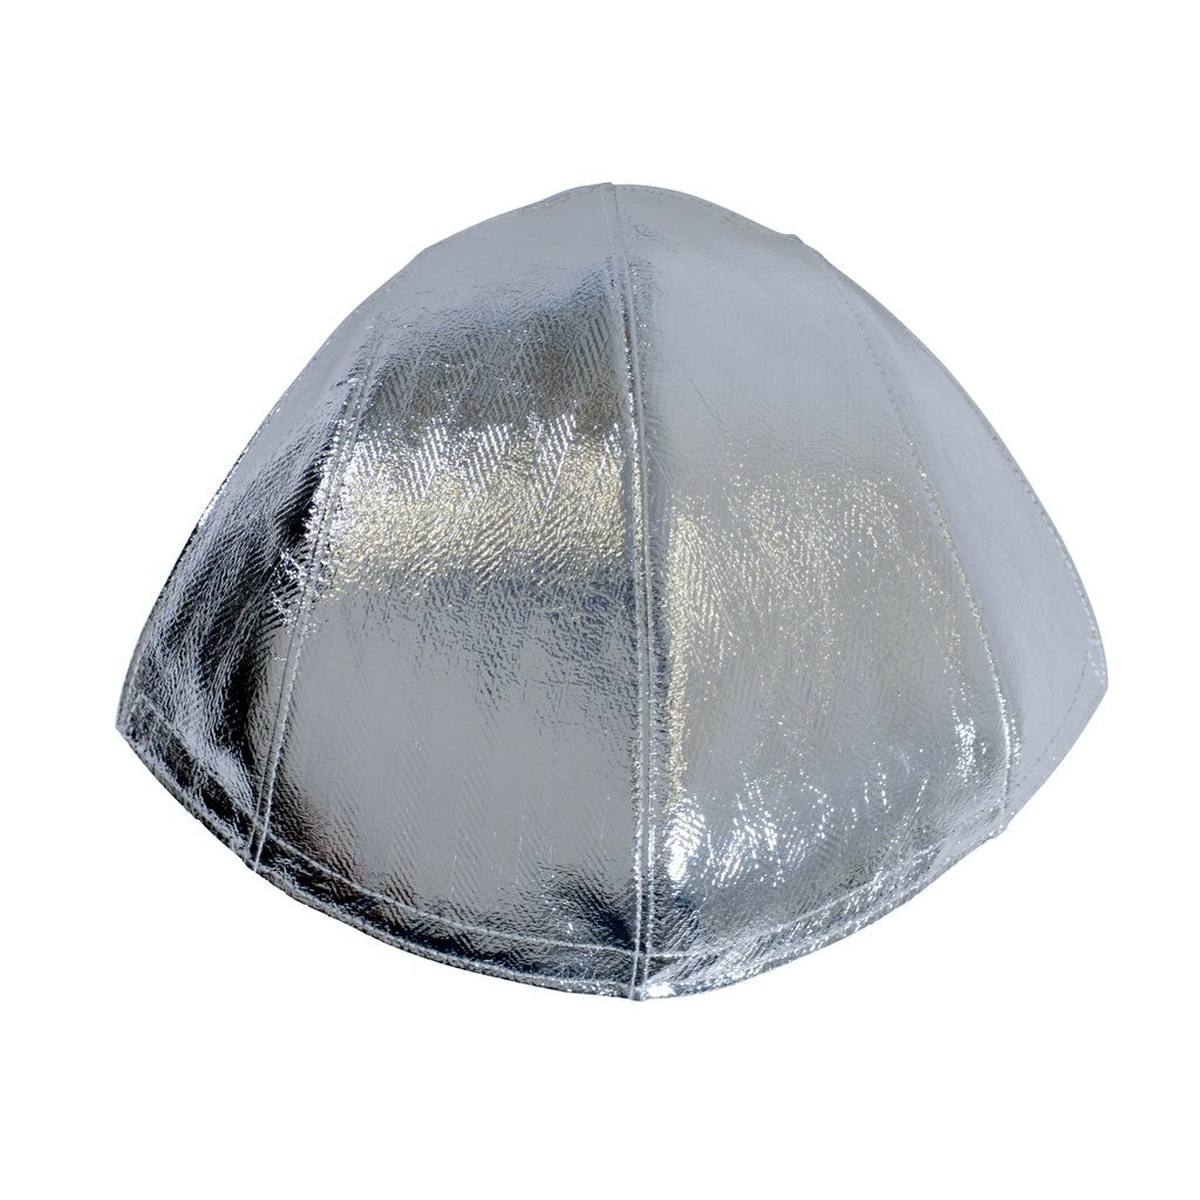 3M FC1-AL forehead protector, aluminium, protects helmet and wearer from flames, splashes and IR